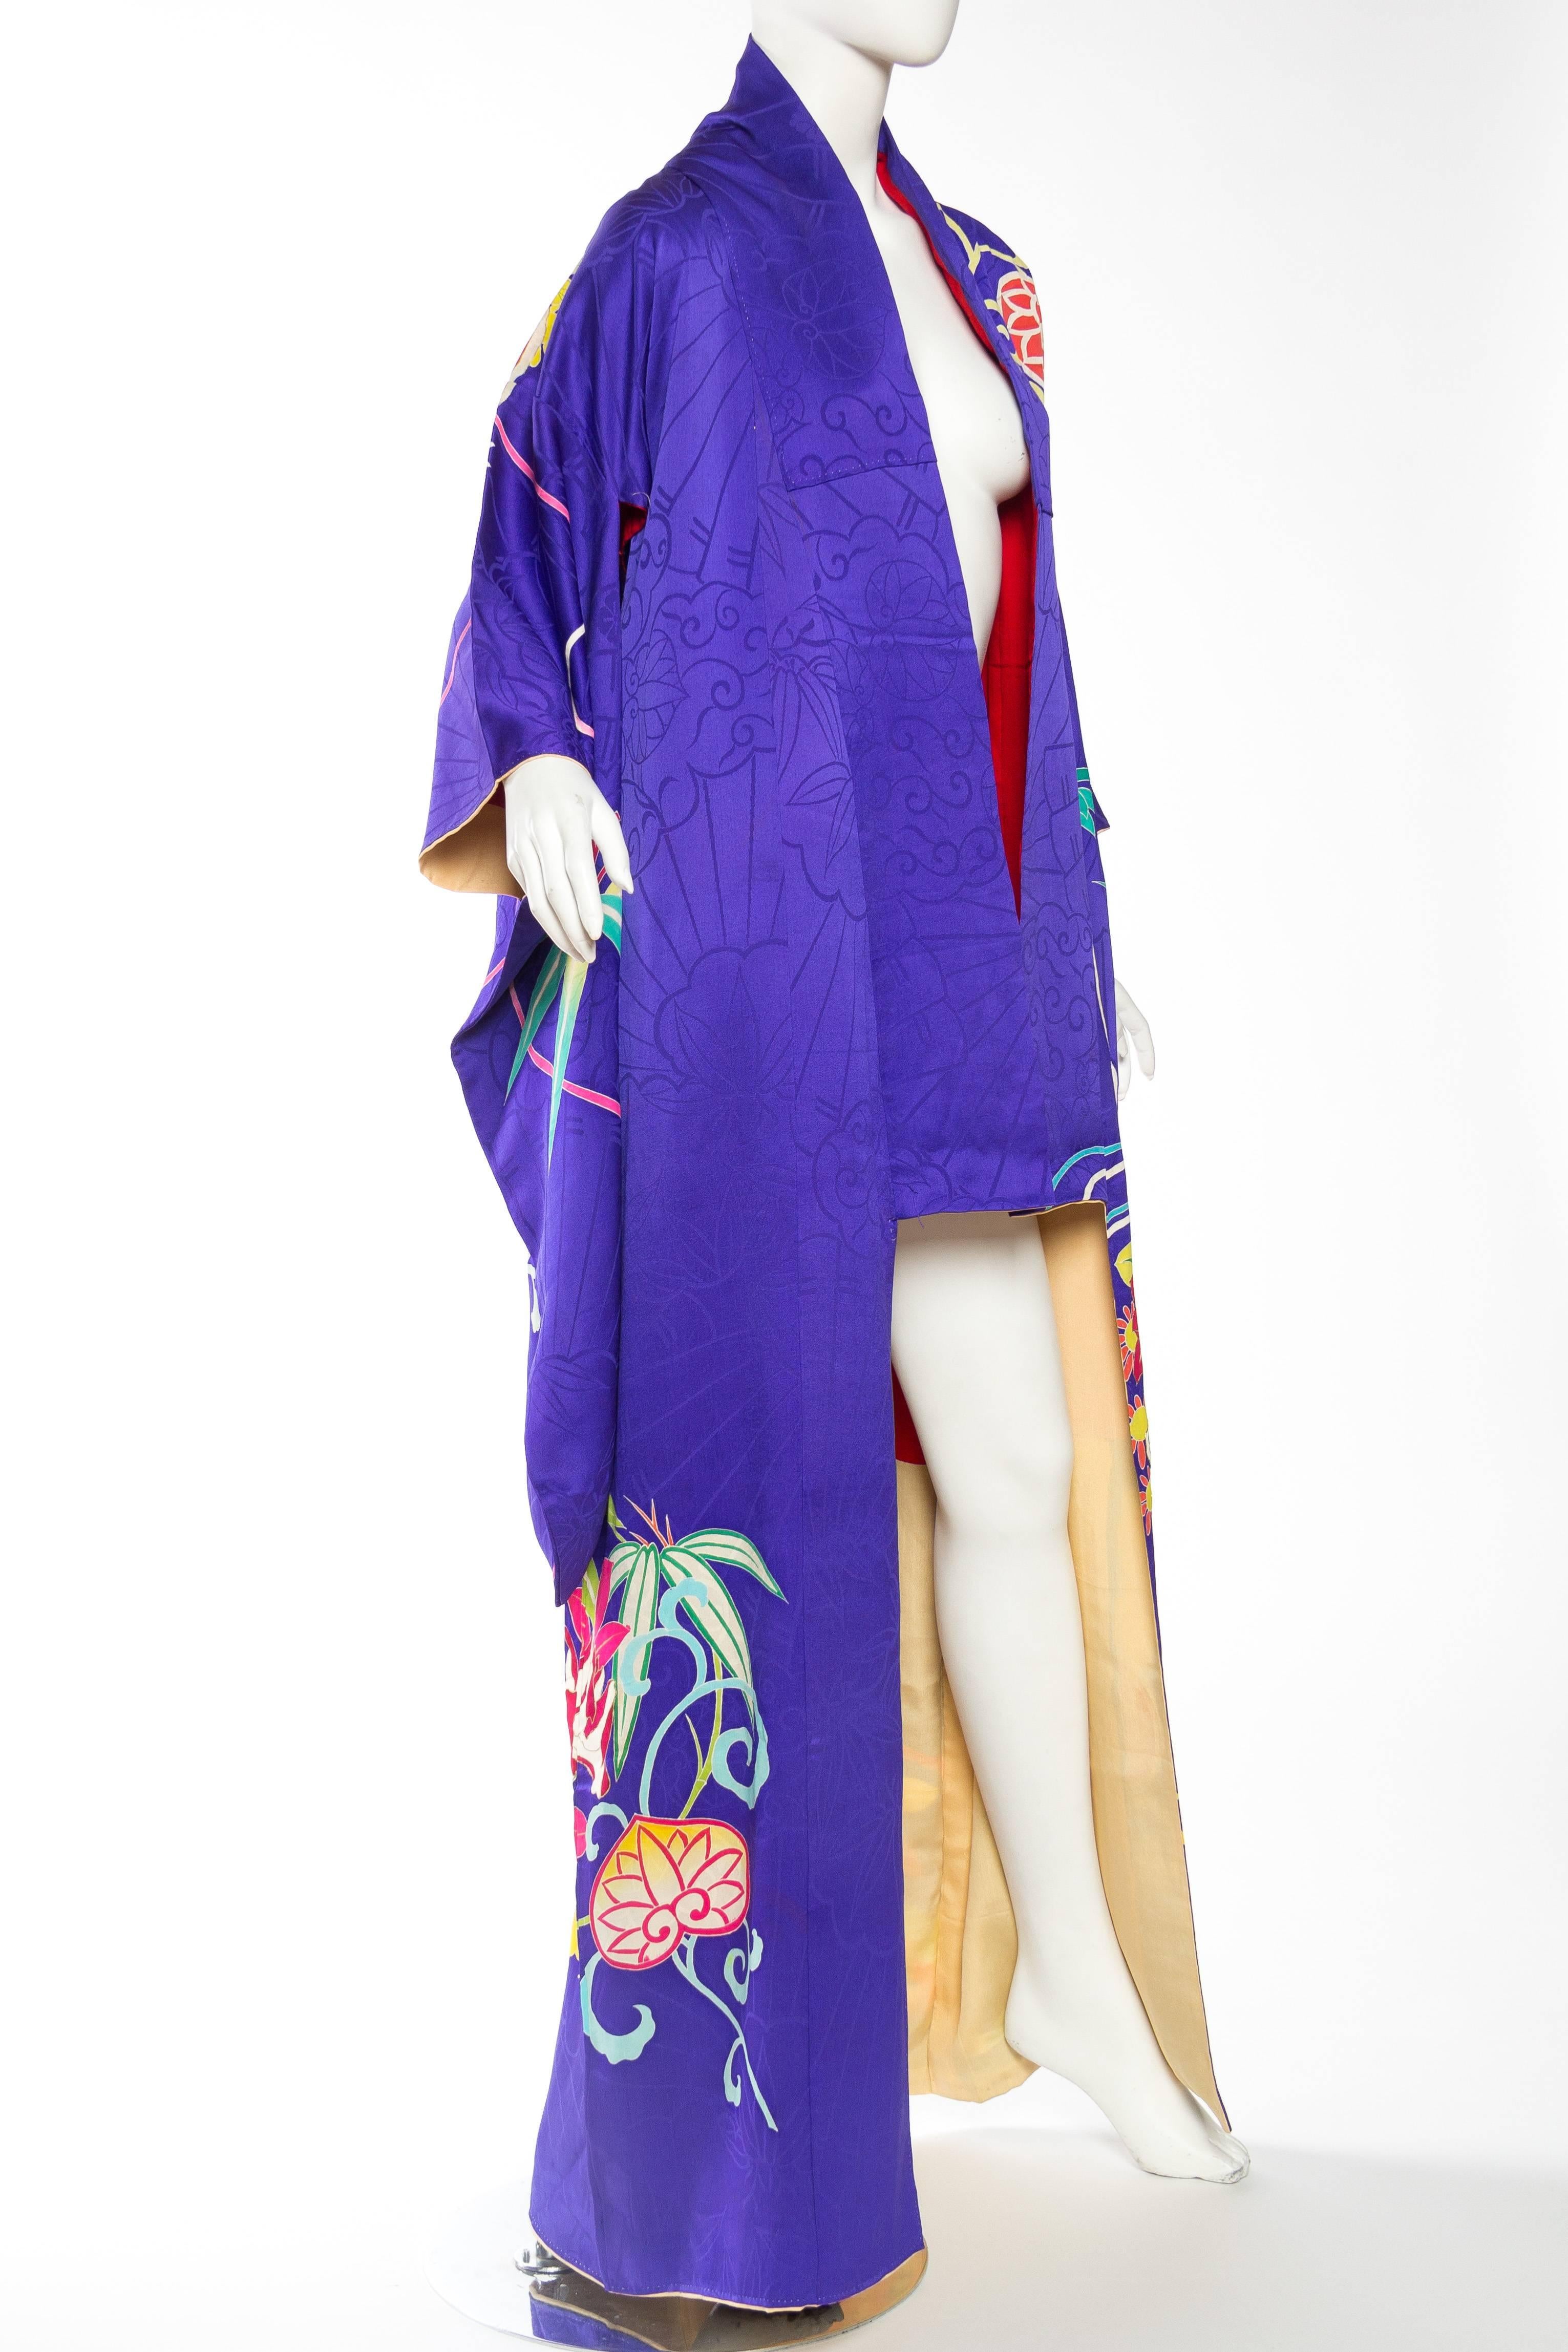 Women's Beautiful Hand-painted and Embroidered Japanese Kimono